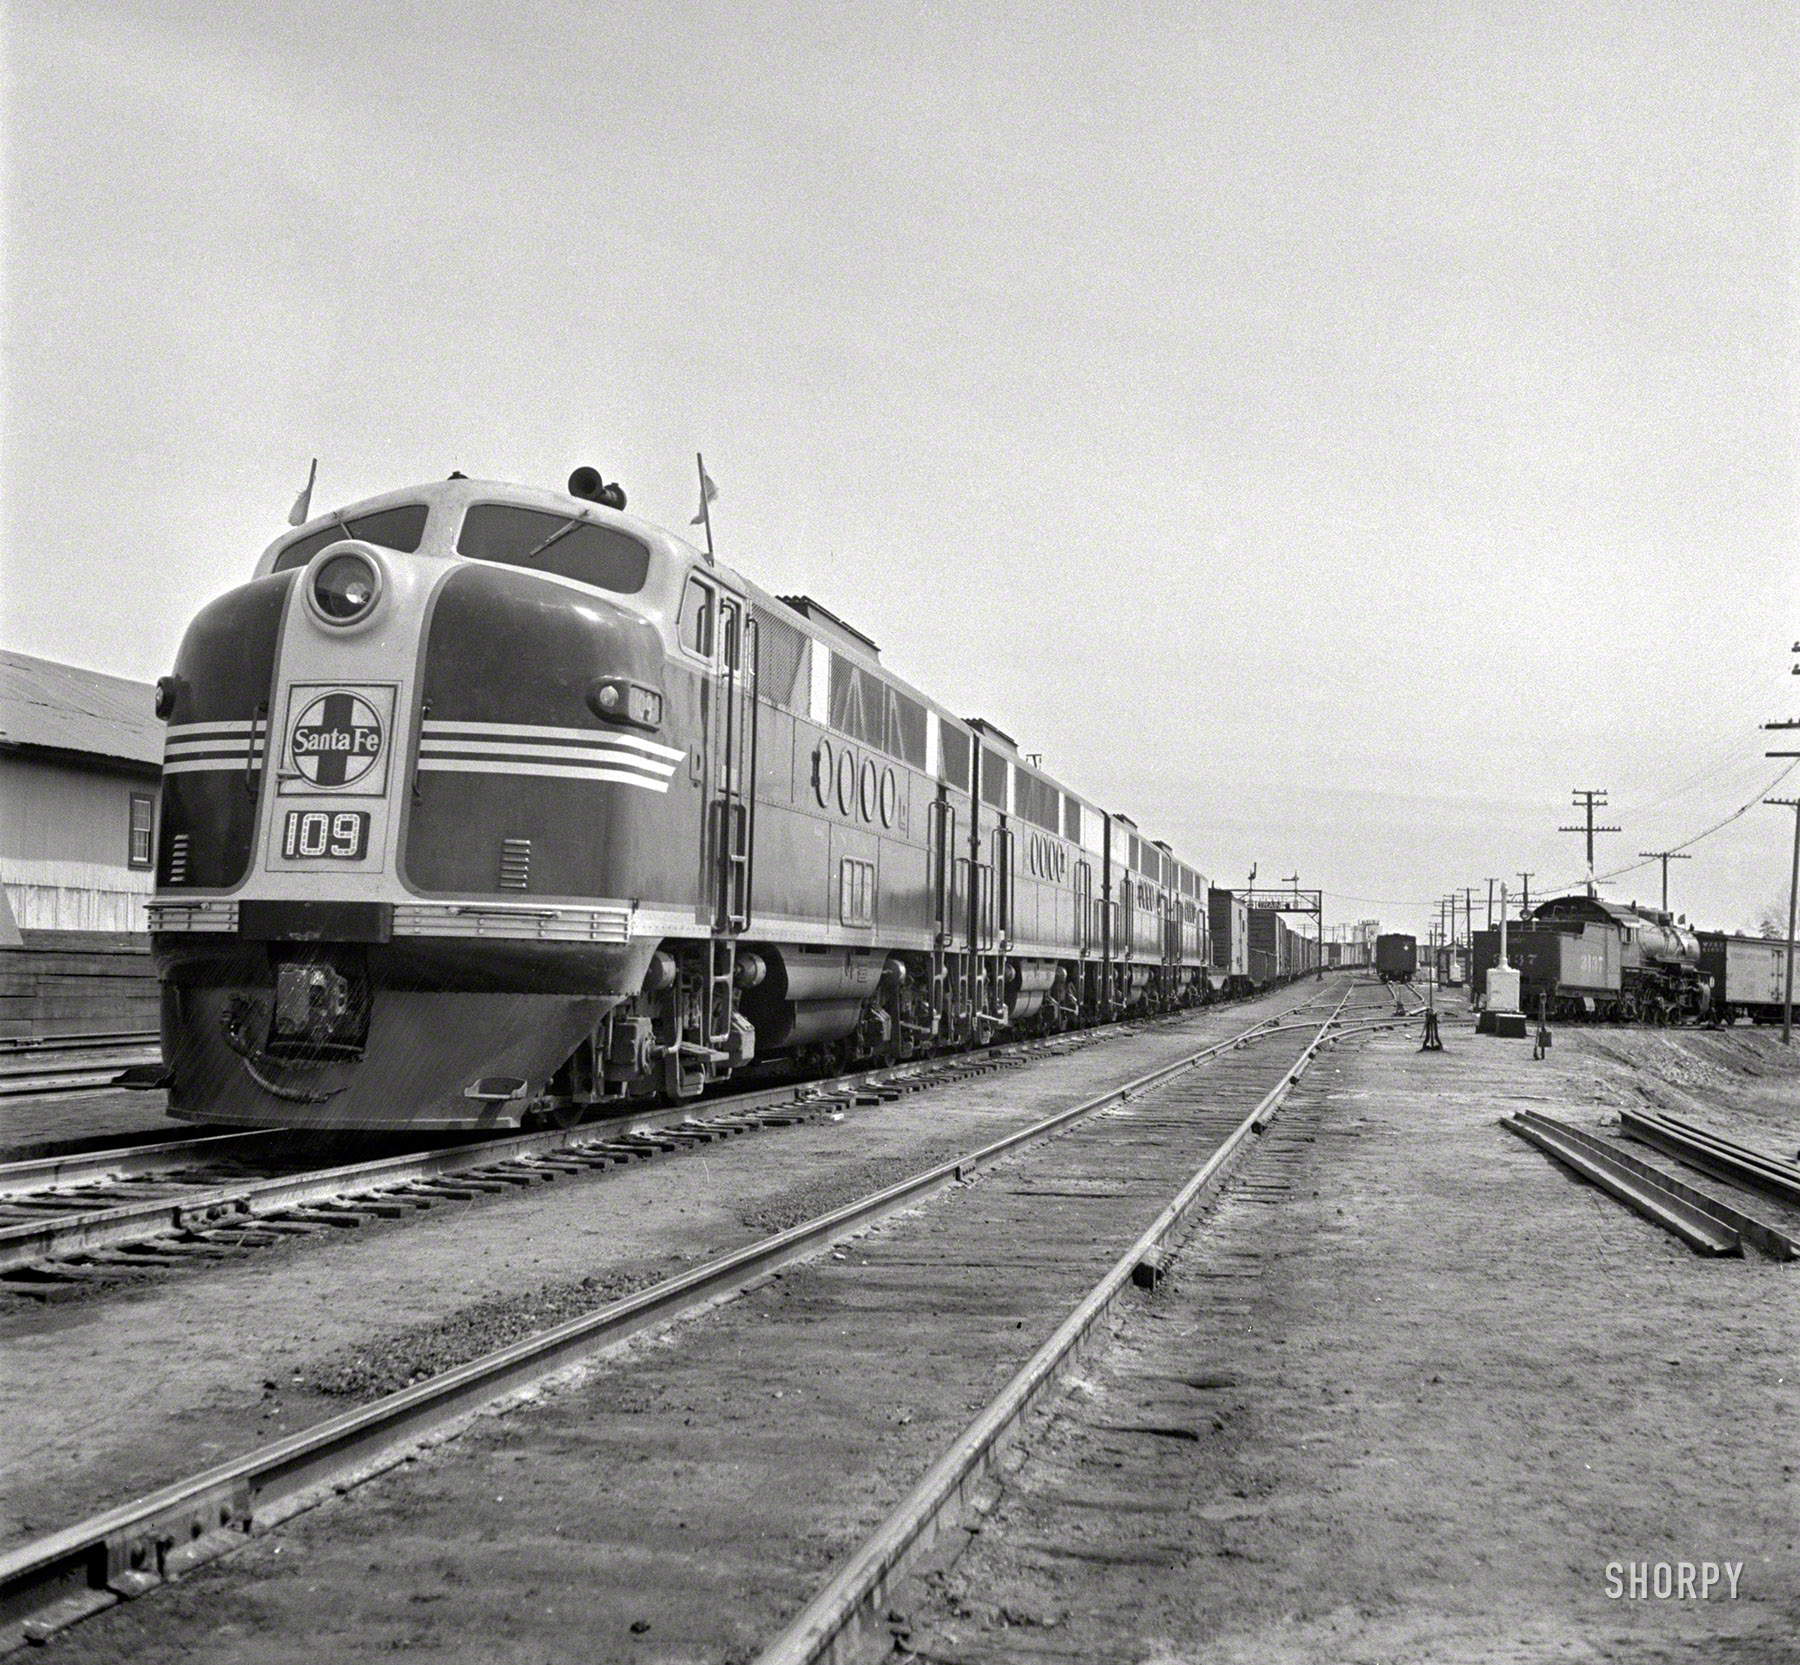 March 1943. "Flagstaff, Arizona. Diesel locomotive entering town along the Atchison, Topeka & Santa Fe Railroad between Winslow and Seligman." Photo by Jack Delano for the Office of War Information. View full size.